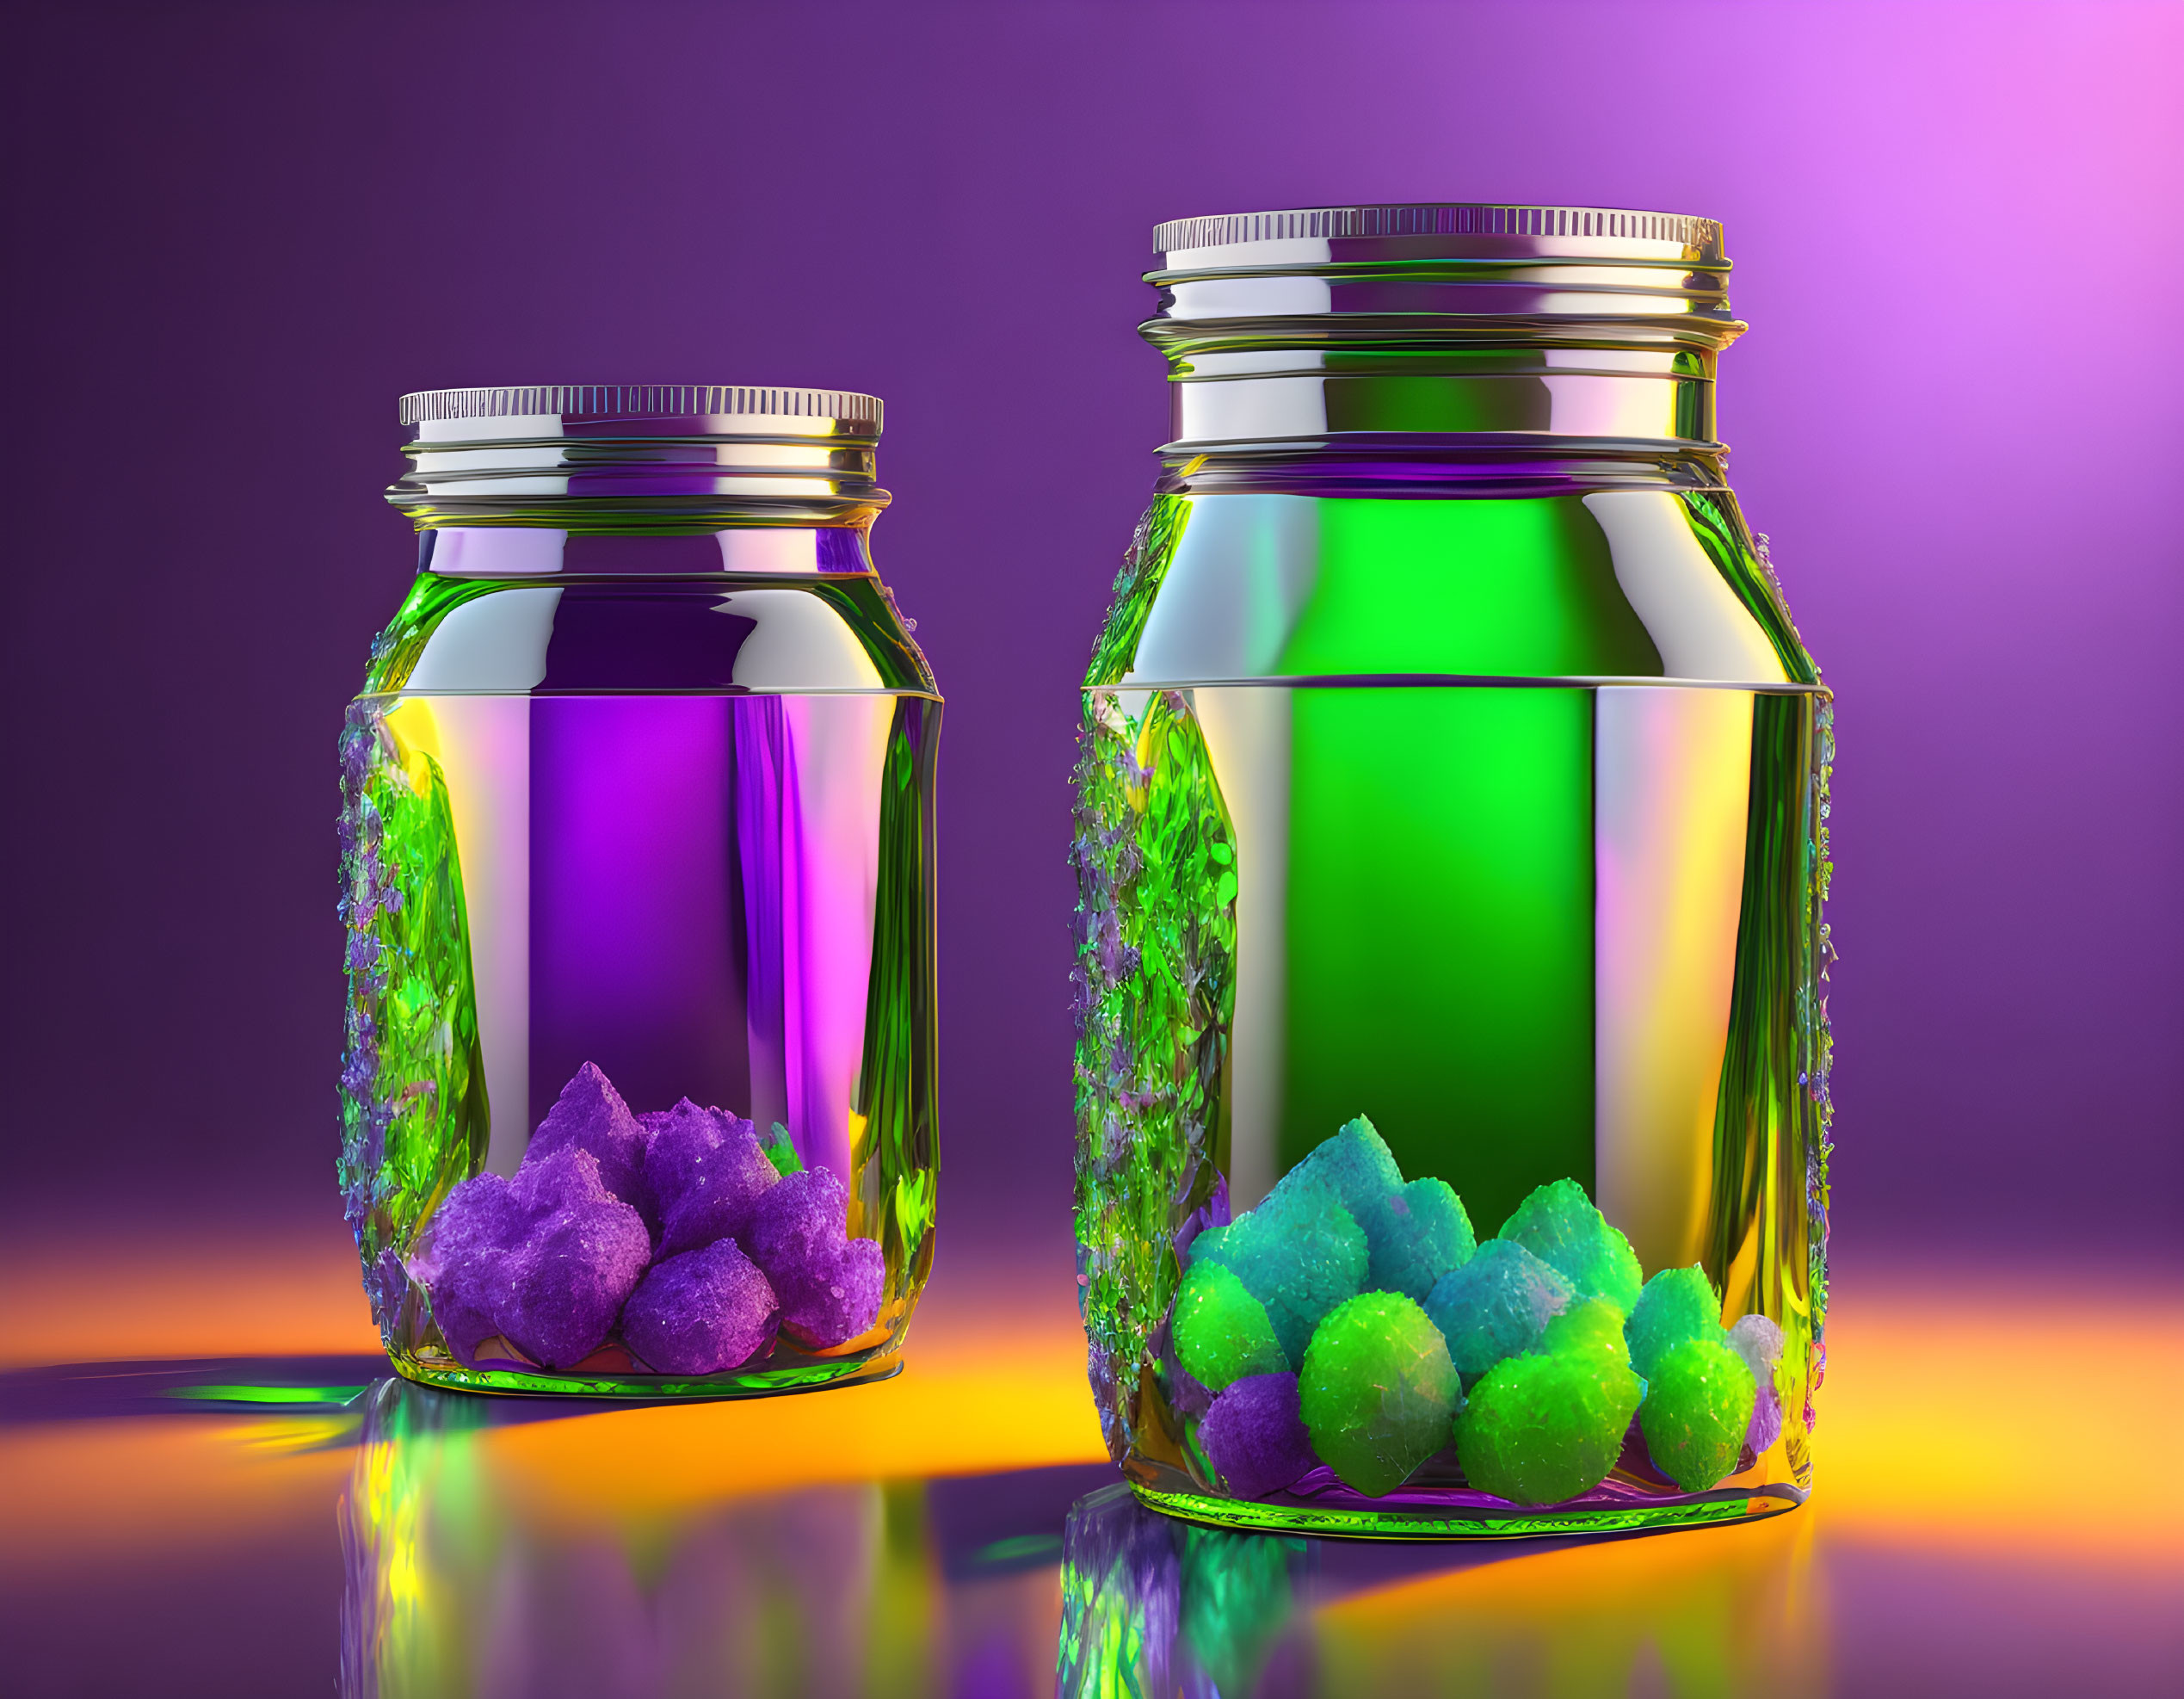 Glass jars with purple and green crystals on gradient background